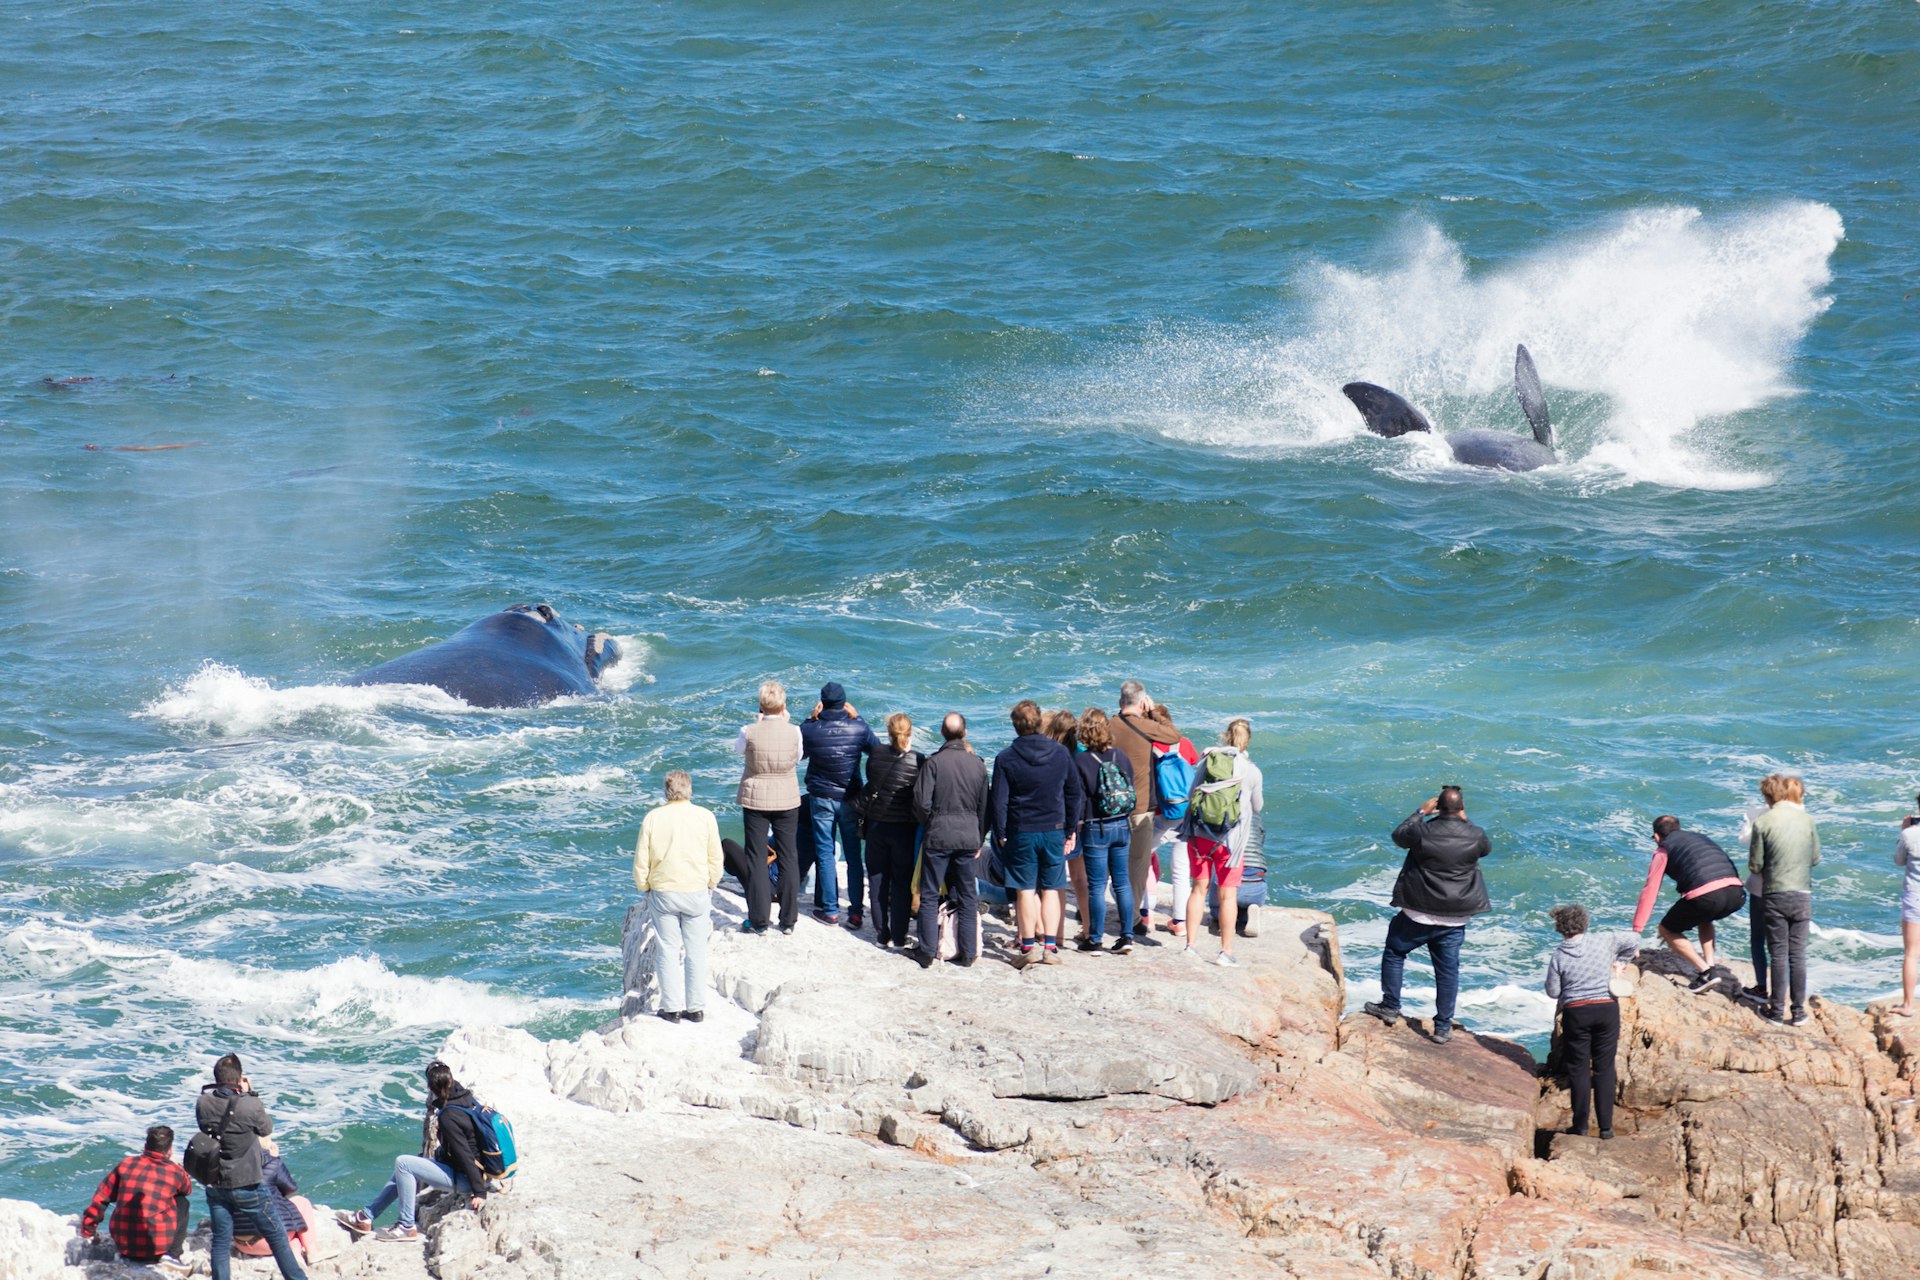 People stand on the shore watching whales splashing about in the ocean